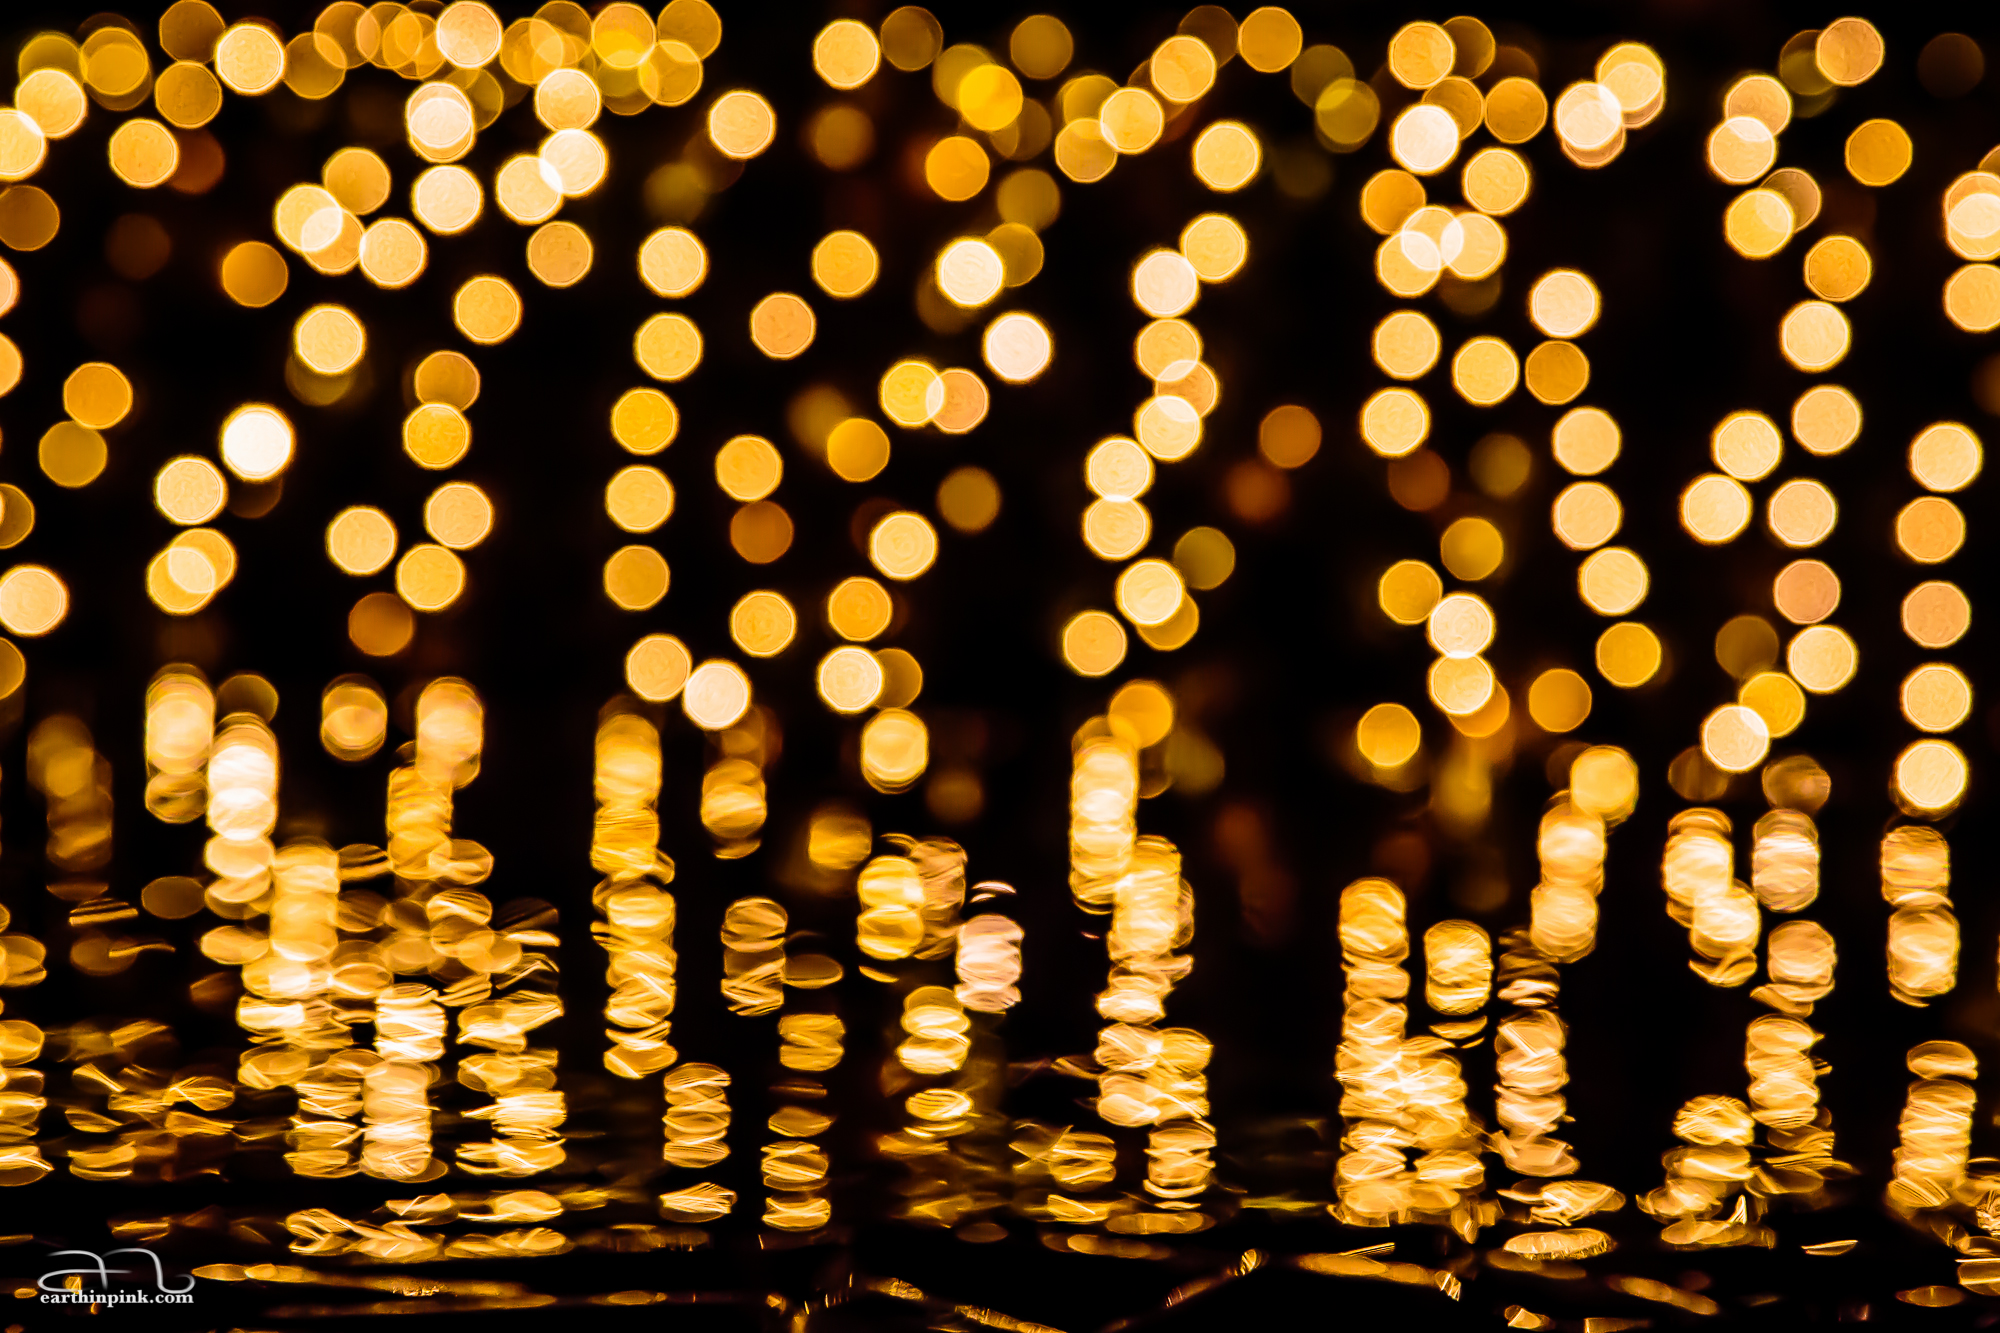 This was taken just outside Osaki station; distant, out of focus lights are reflected on the surface of a little pond, which makes them look like falling golden coins.